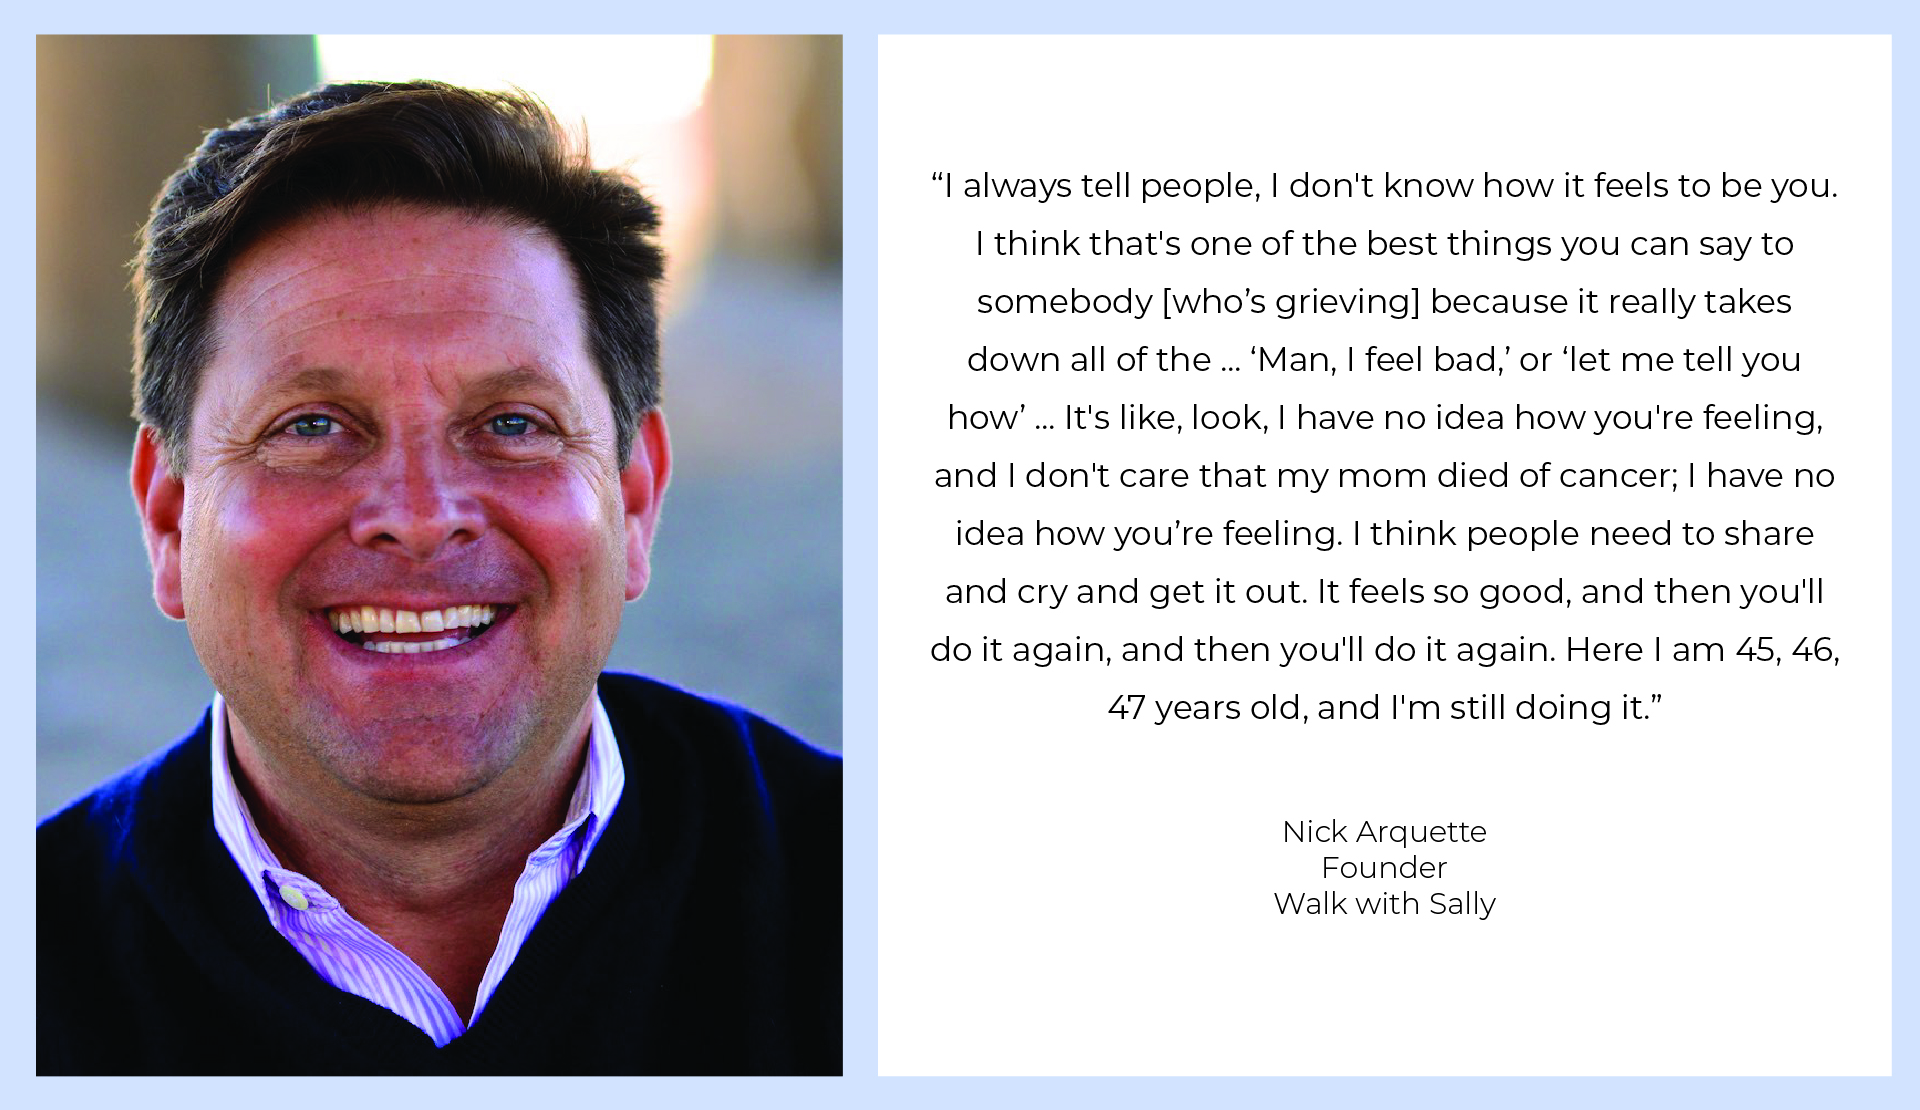 Nick Arquette - Founder of Walk With Sally